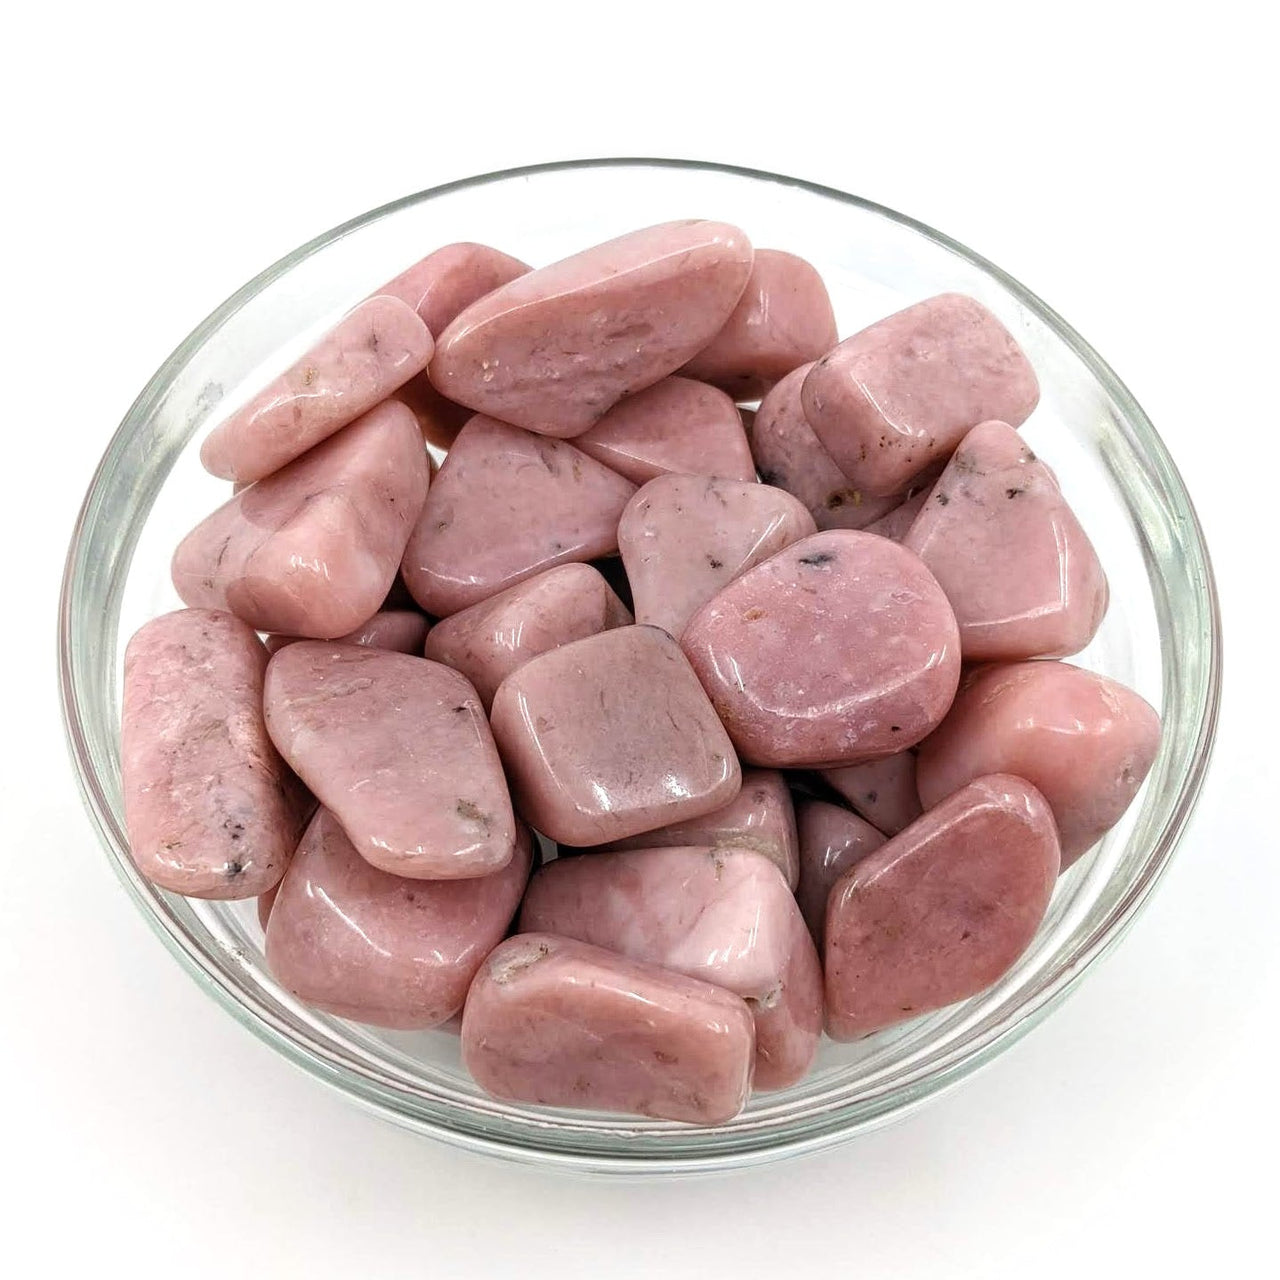 1 Pink Opal Large Tumbled Stone Grade A #SK7407 - $5